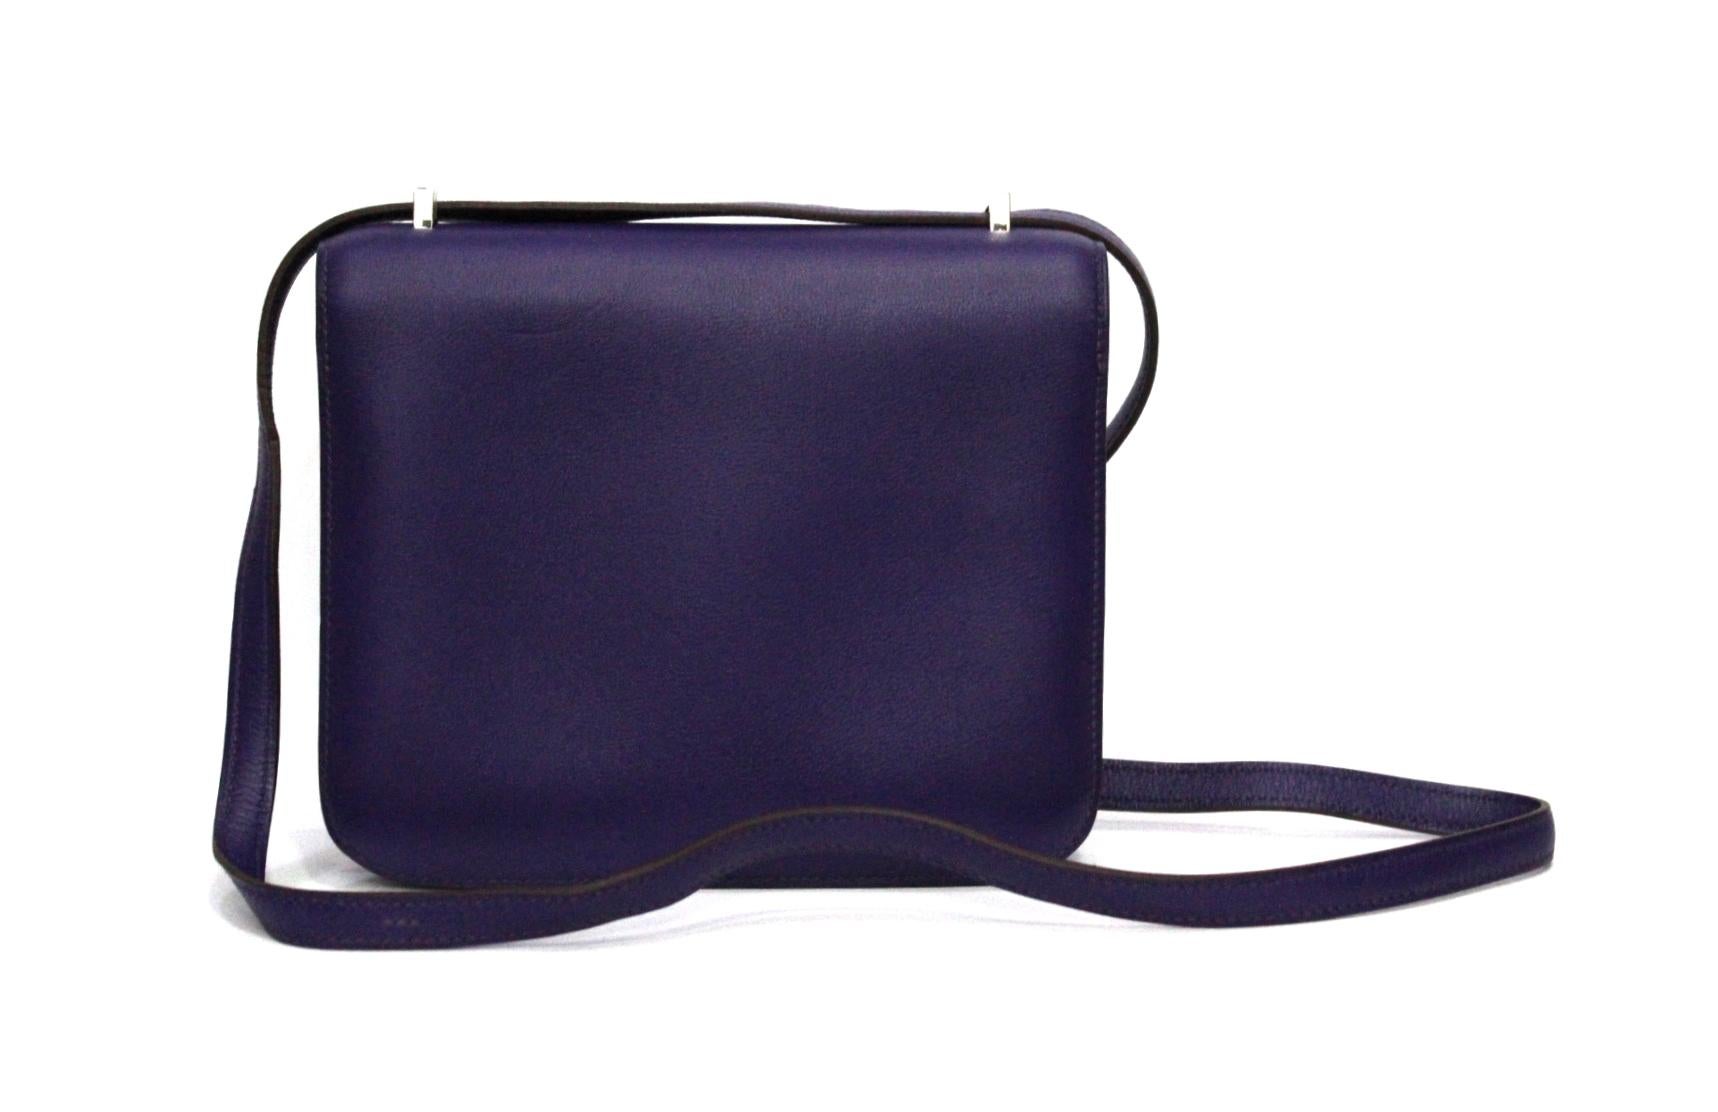 This Hermès Constance bag is featured in the Anemone color, which is a dark purple tone. This bag is made from smooth Swift leather and is accentuated by palladium hardware. This Constance bag features the signature 